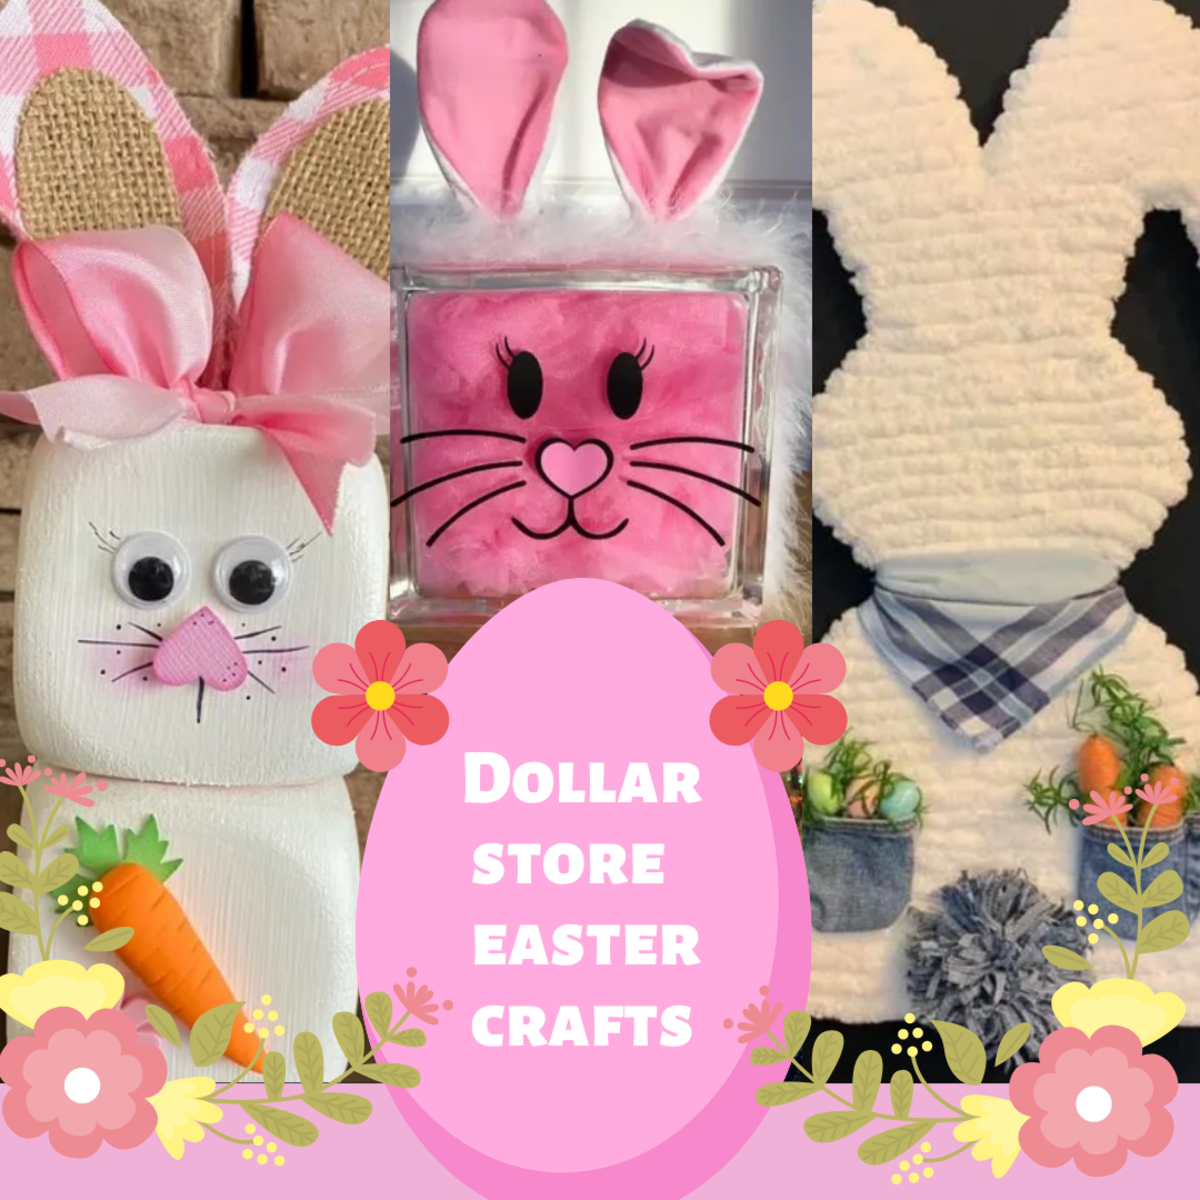 100+ Adorable Dollar Store Easter Crafts that look Egg-stra Special